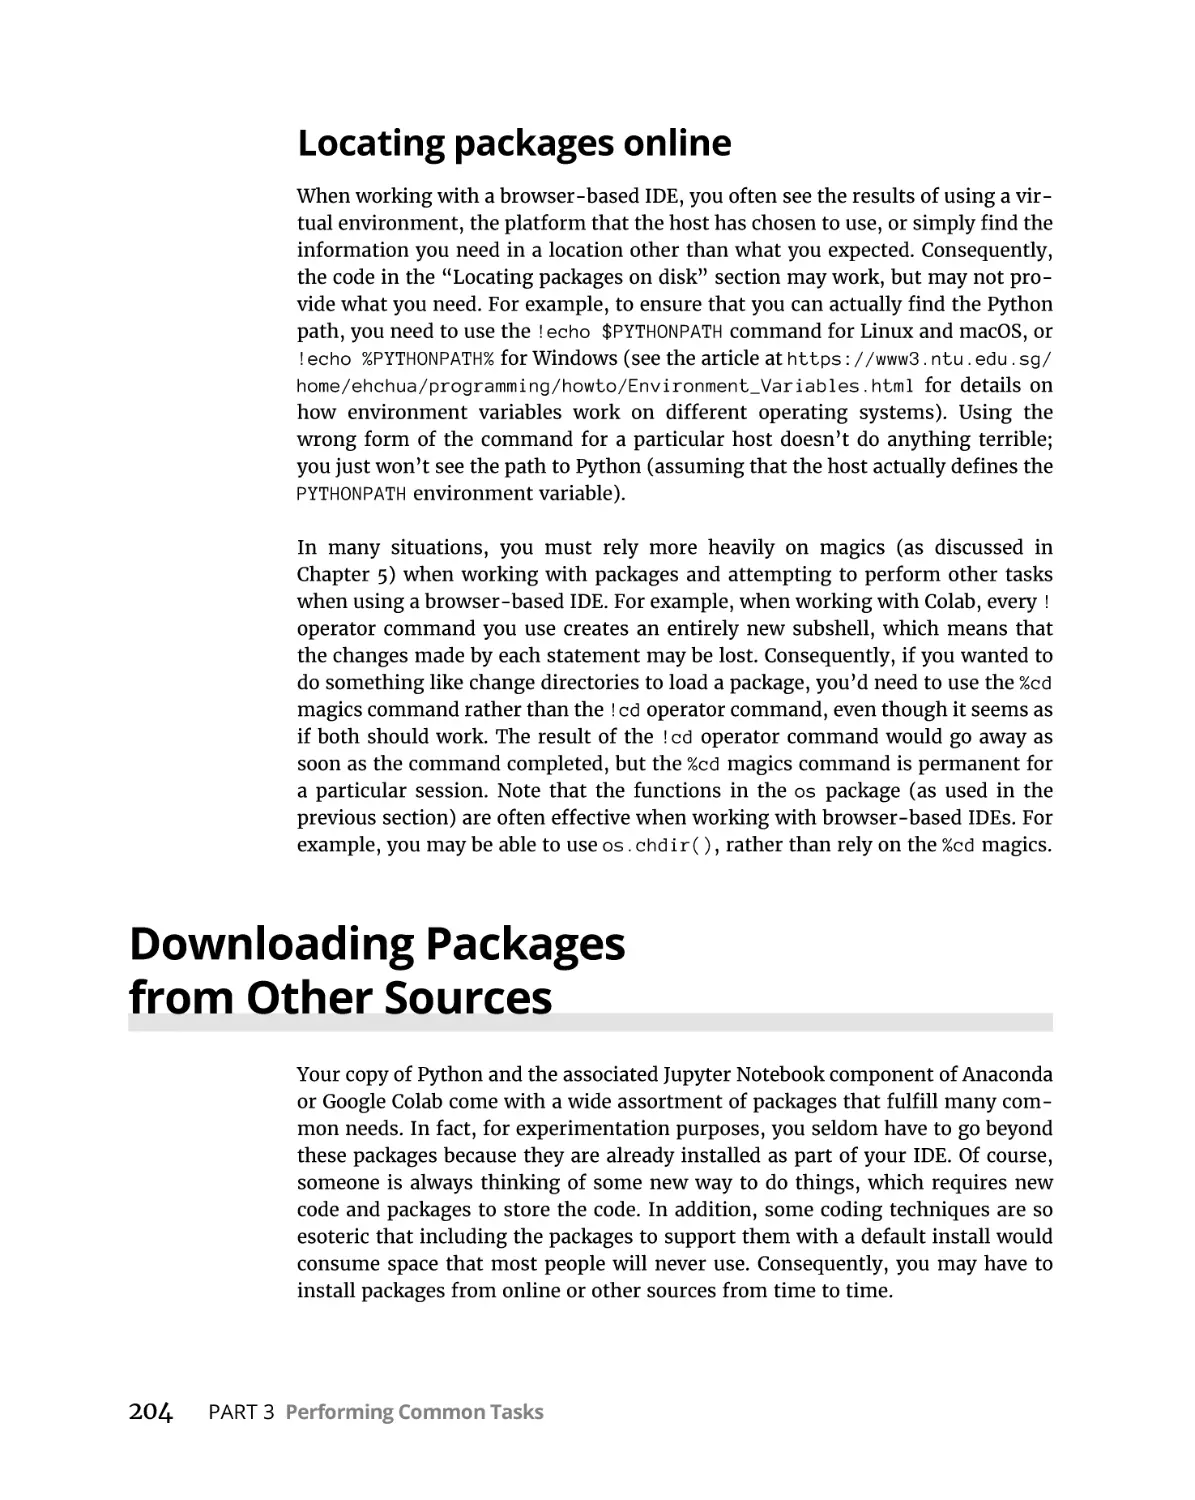 Locating packages online
Downloading Packages from Other Sources